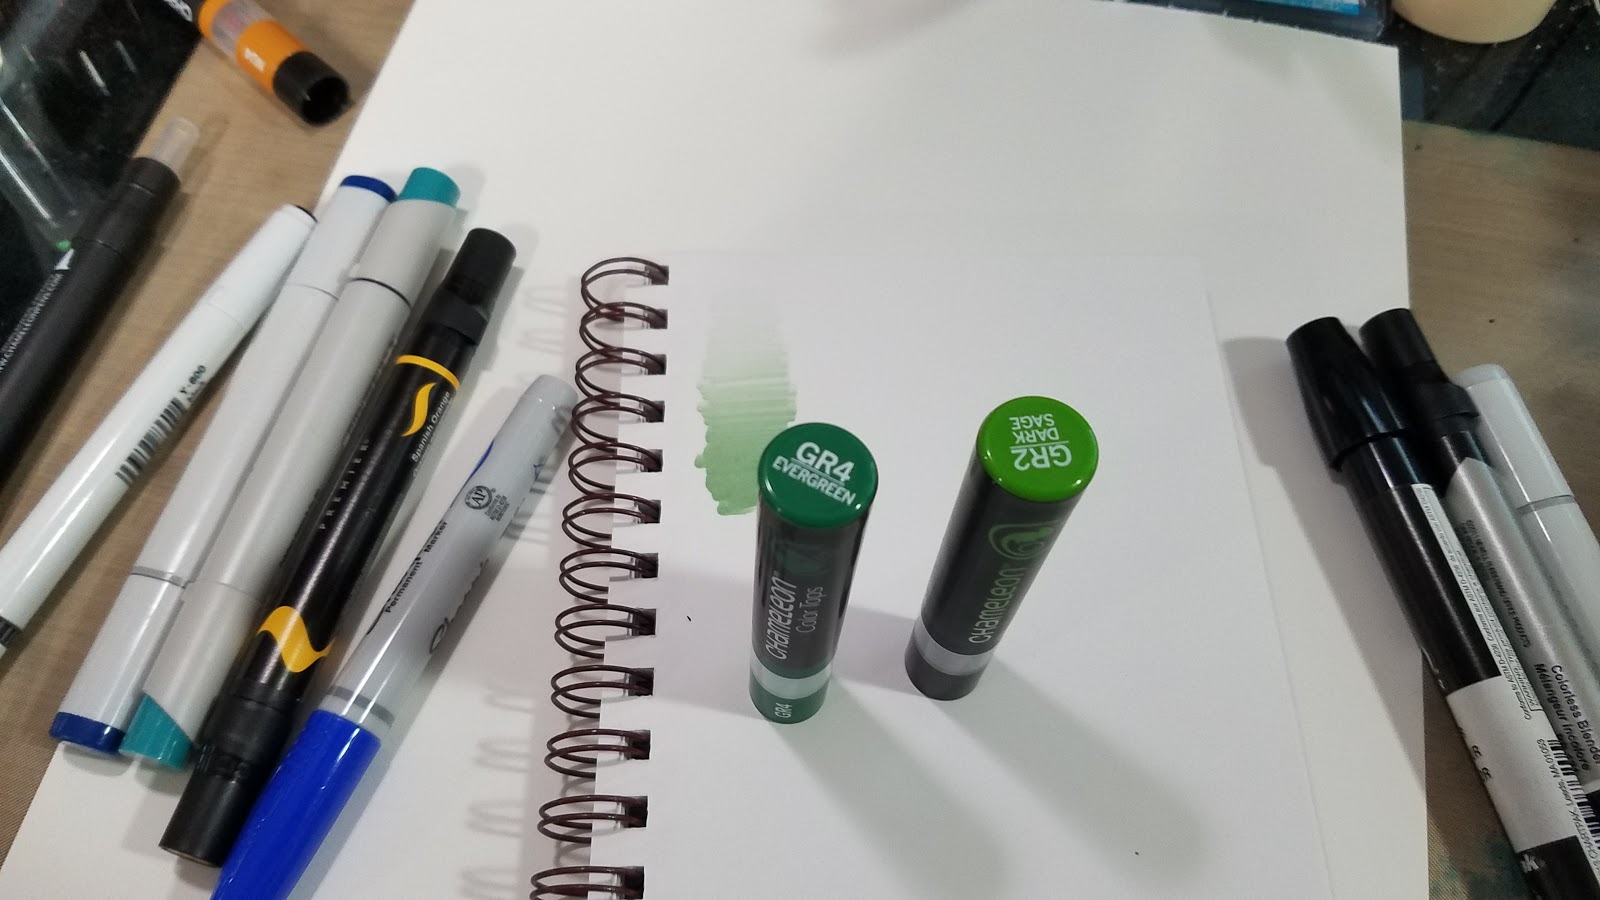 Chameleon Pens Are Innovative Alcohol Markers That Allow You to